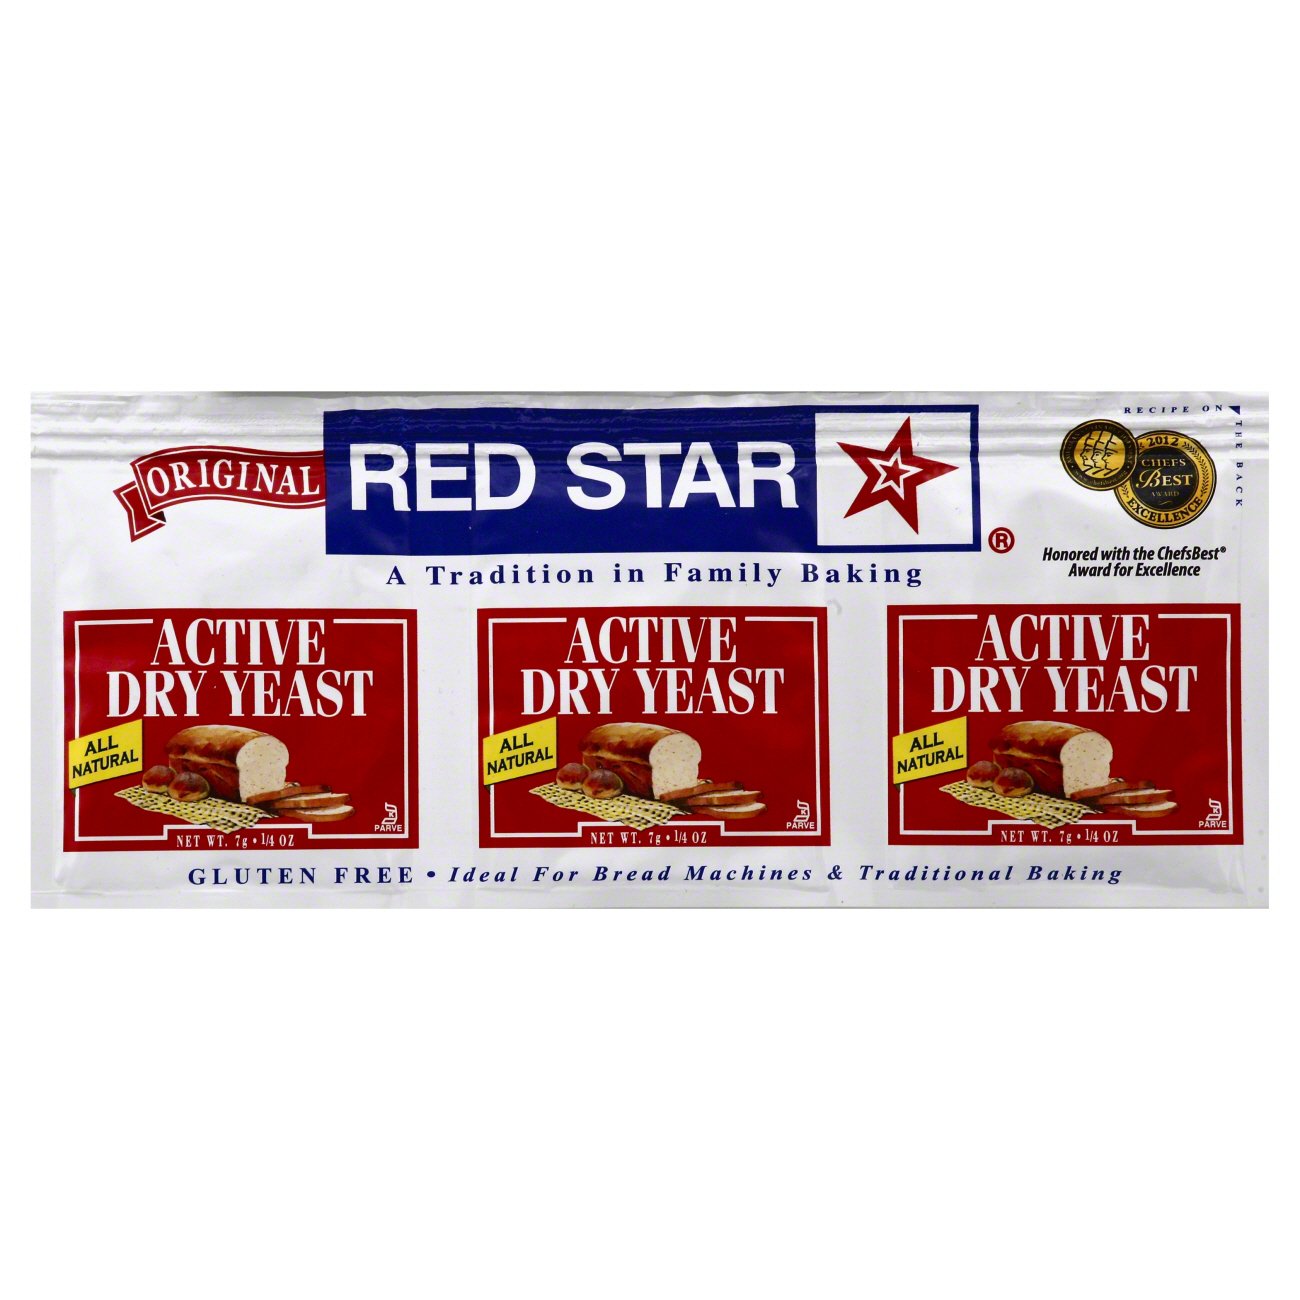 Red Star Active Dry Yeast 2 Lbs Best by 3/22 Ships Priority 